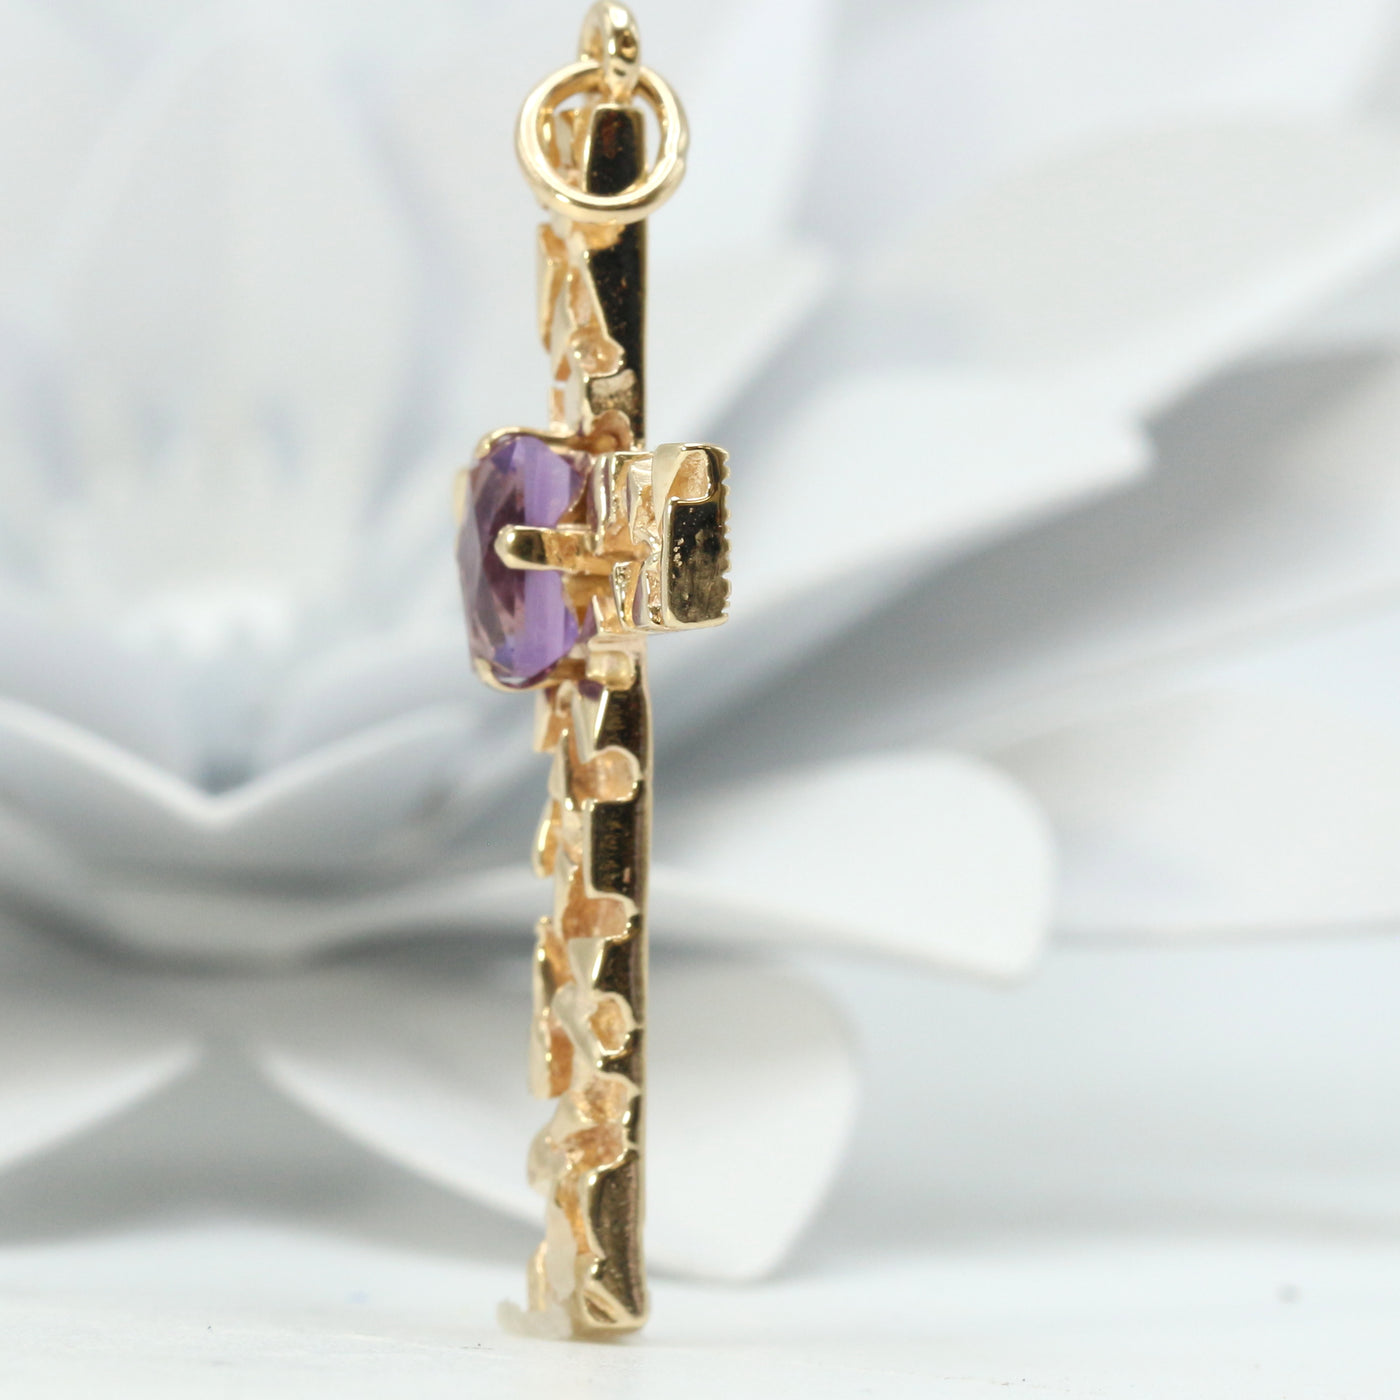 Gold Cross with Amethyst Center